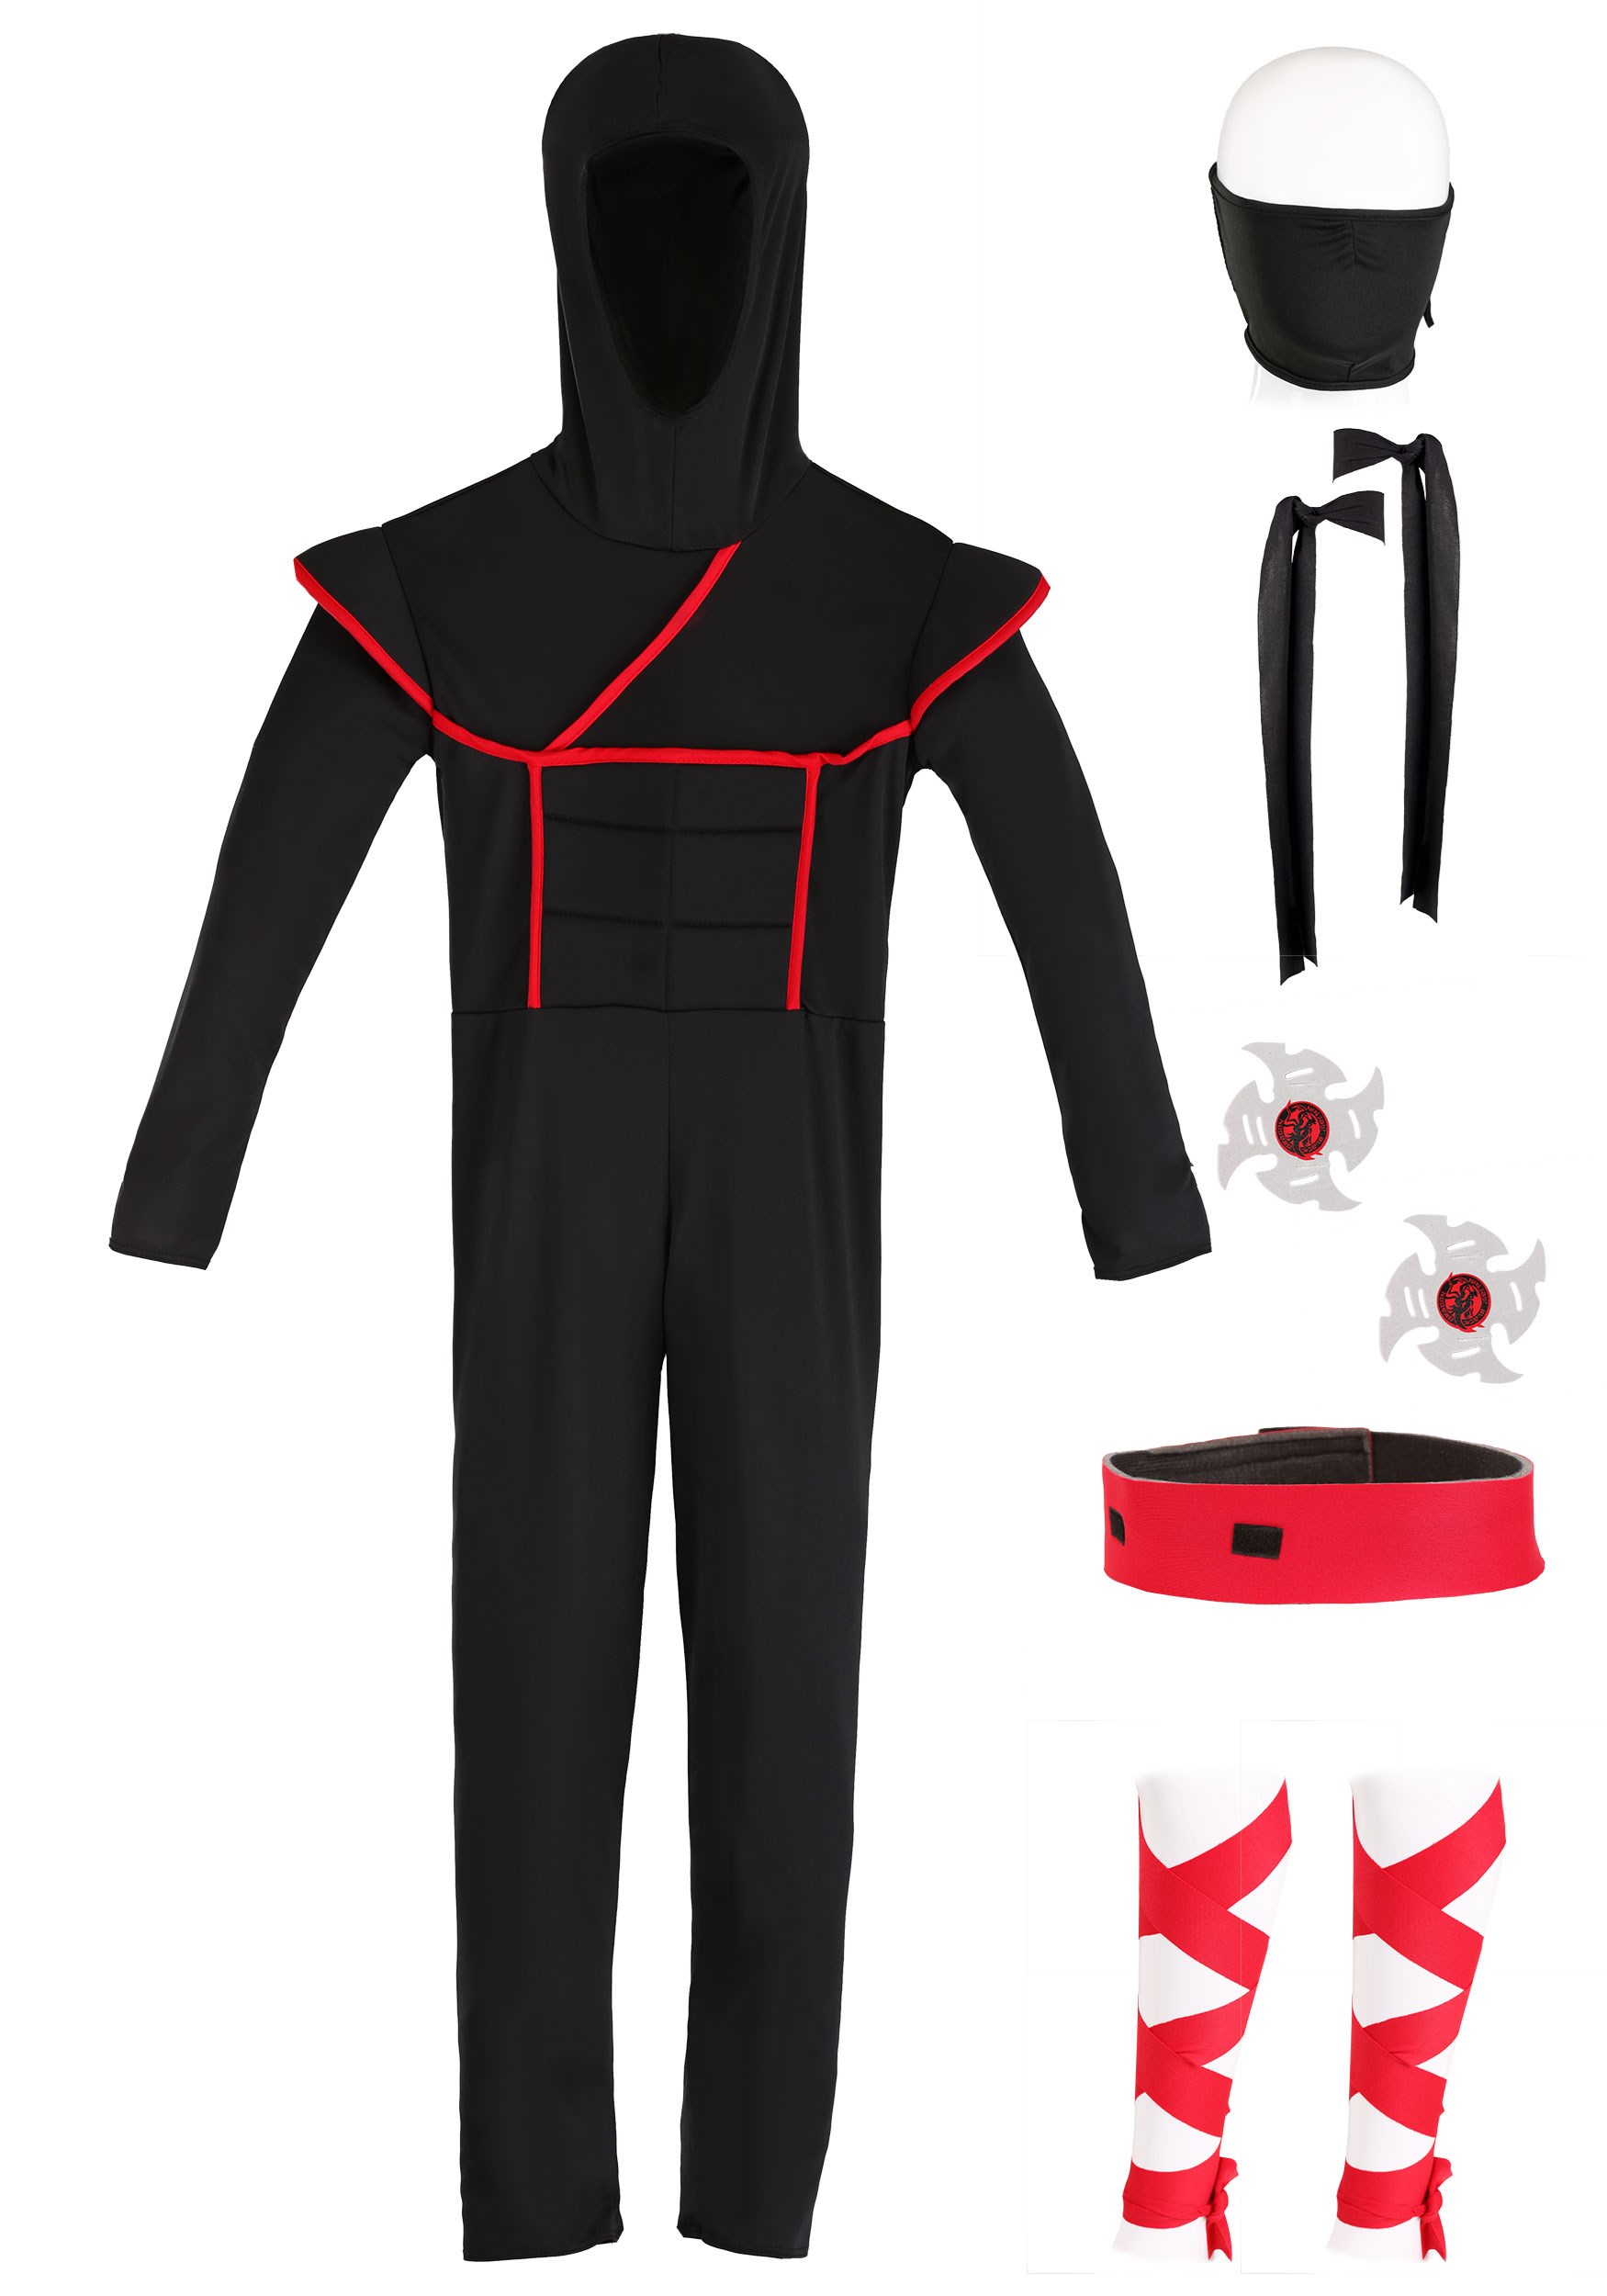 Kids Ninja Costume Halloween Costumes For Boys(can't Arrive Before